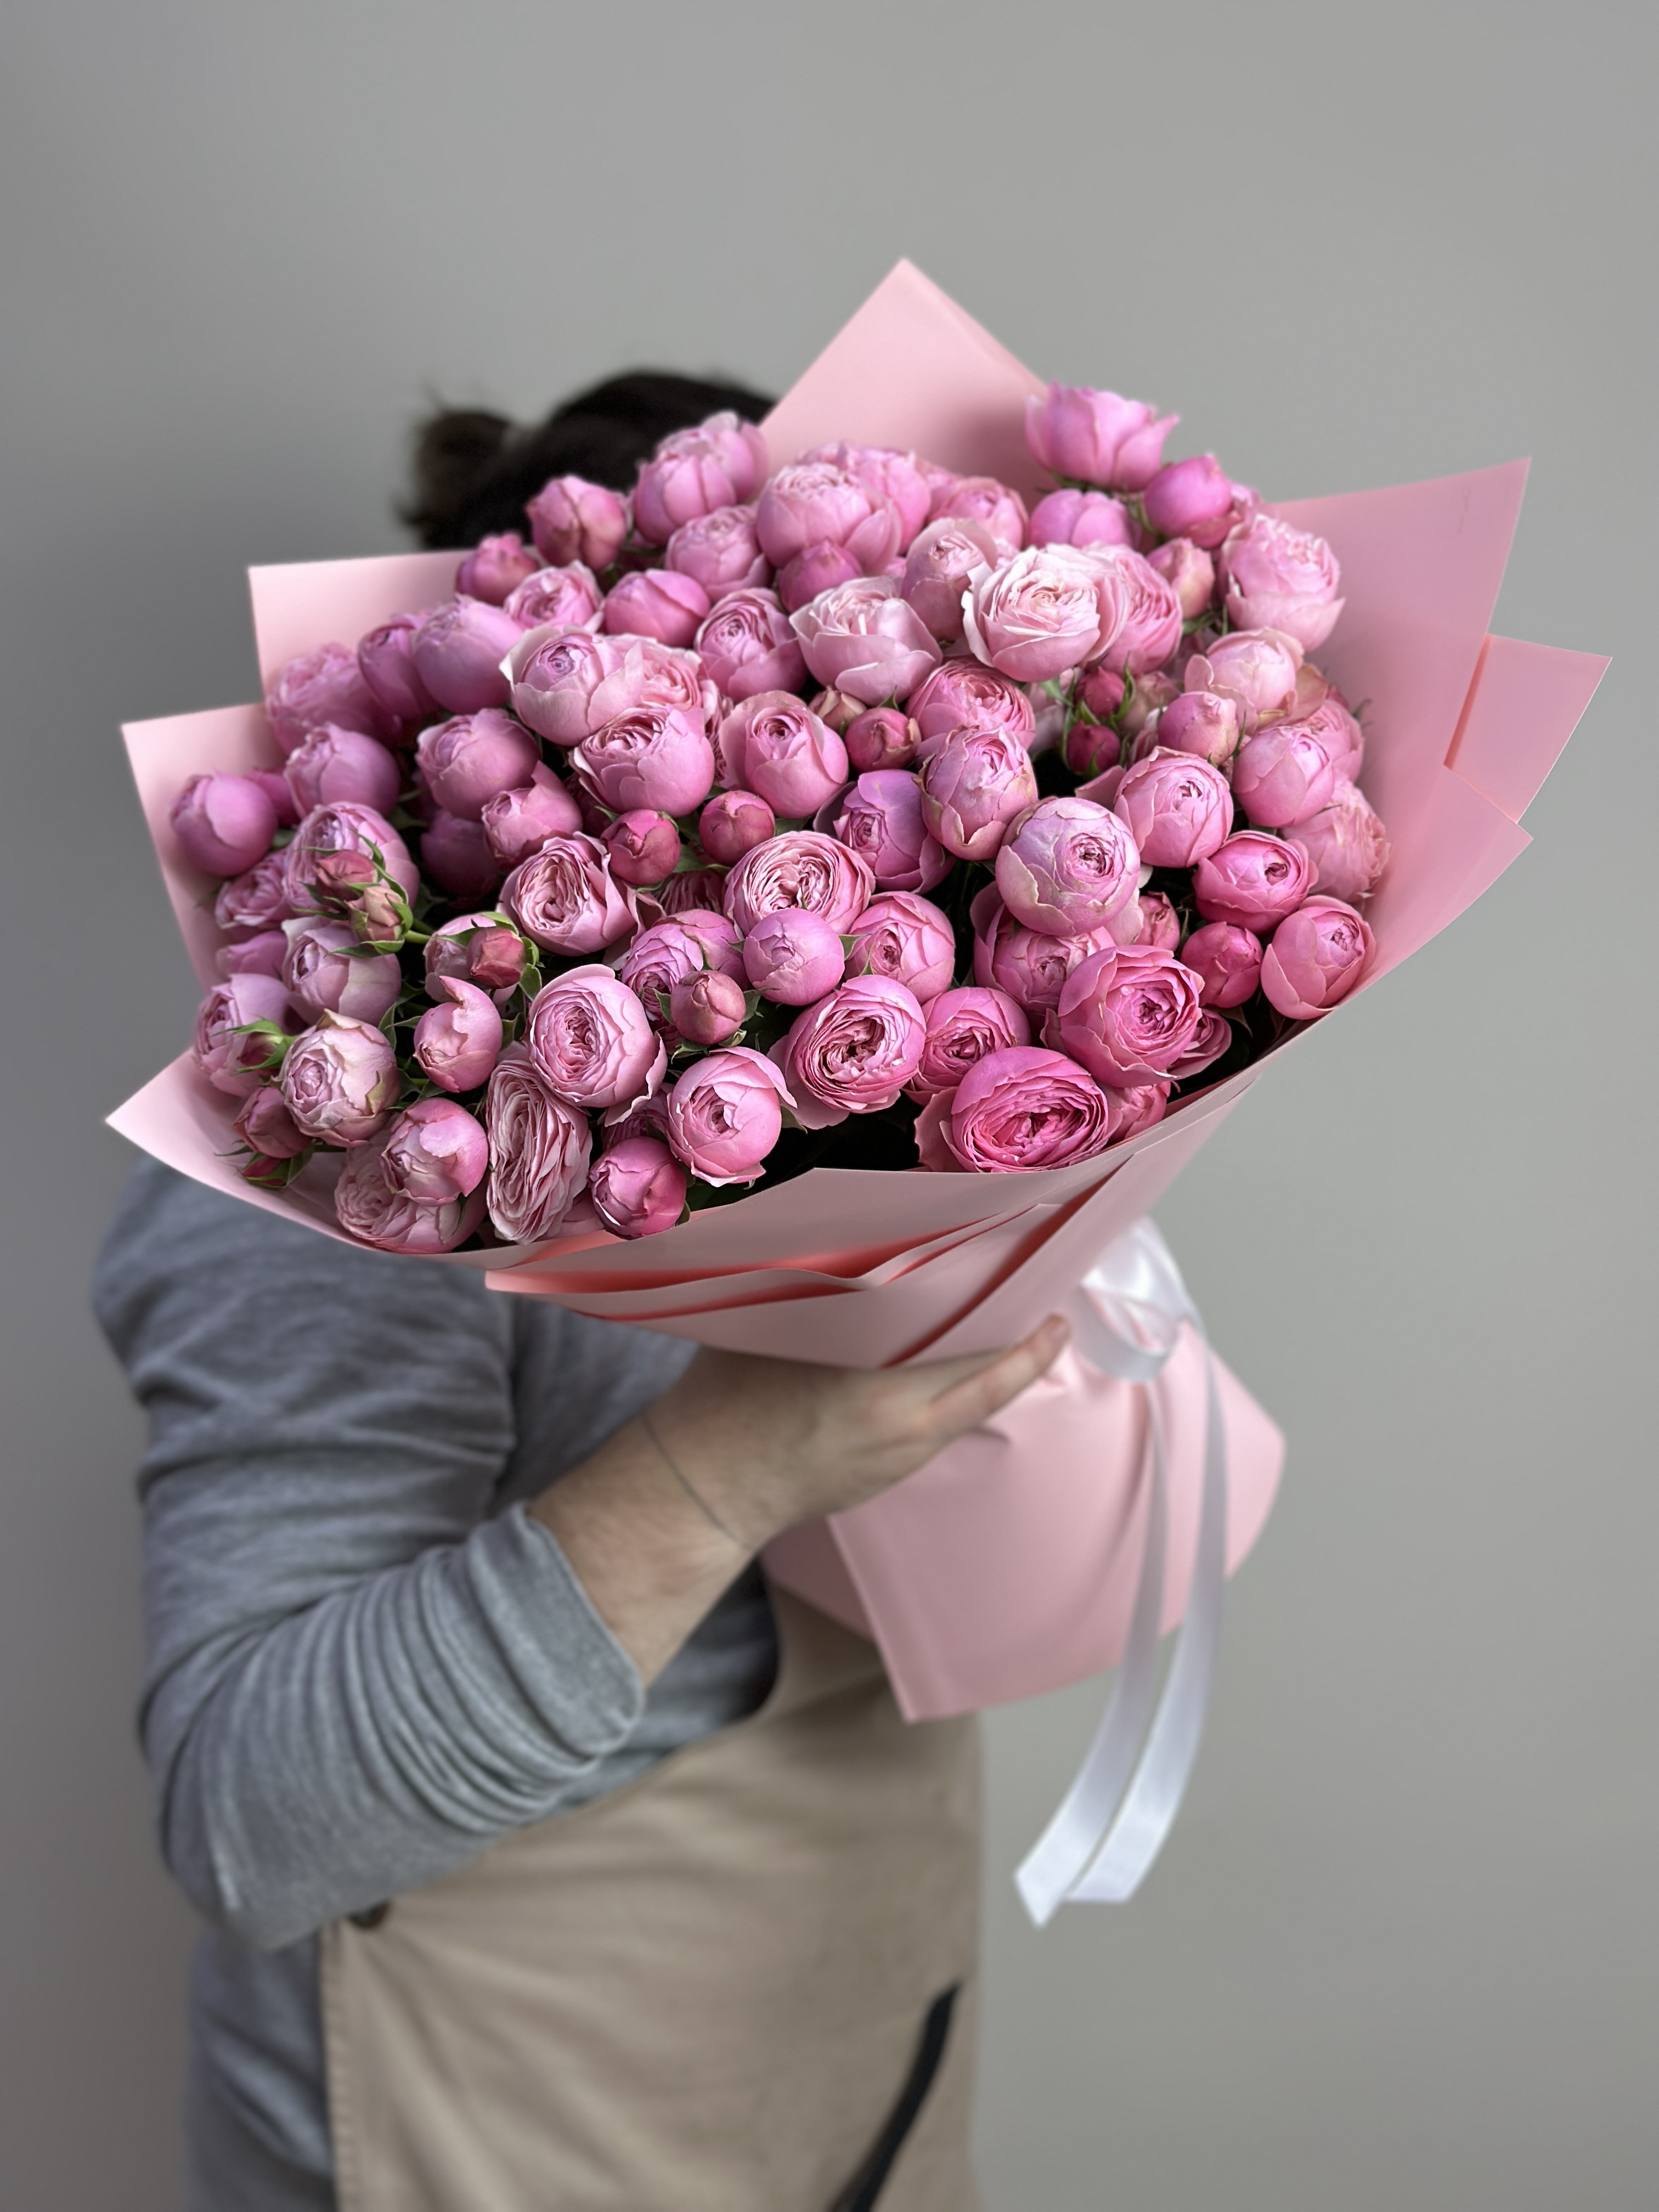 Bouquet of Shrub peony rose flowers delivered to Astana